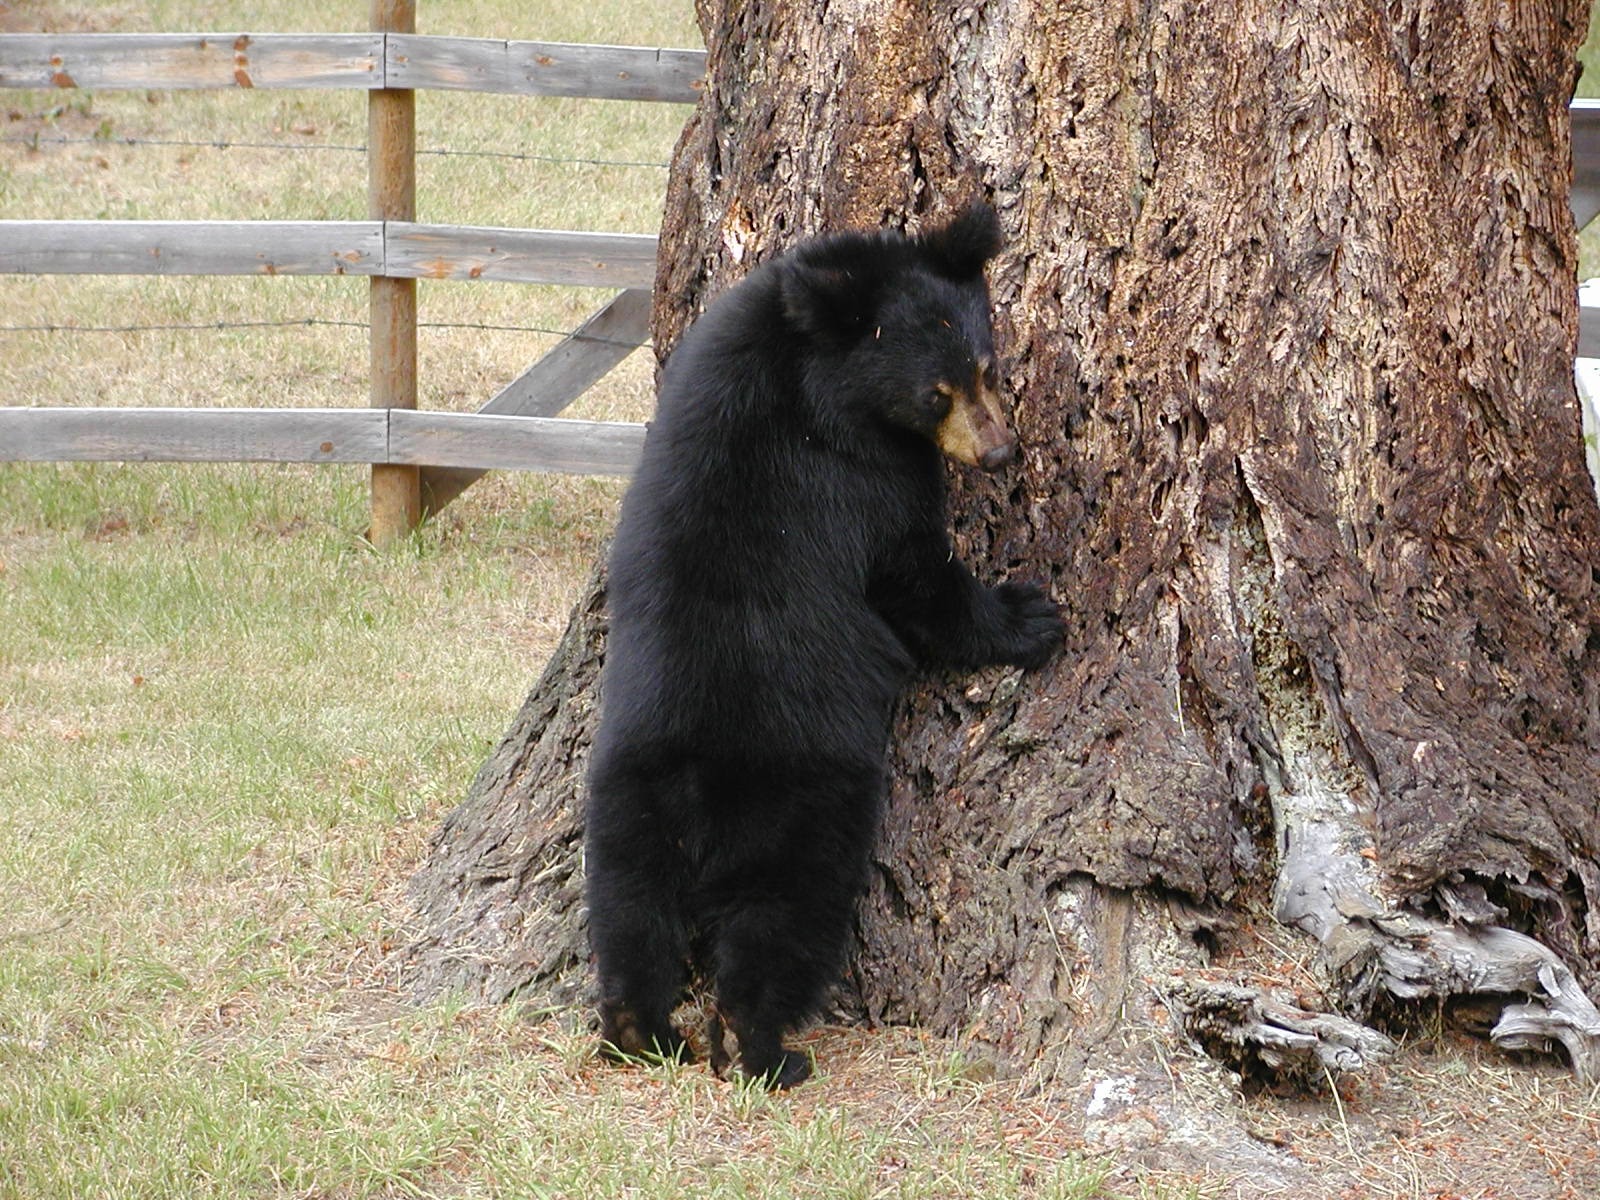 black bear leaning on tree trunk during daytime